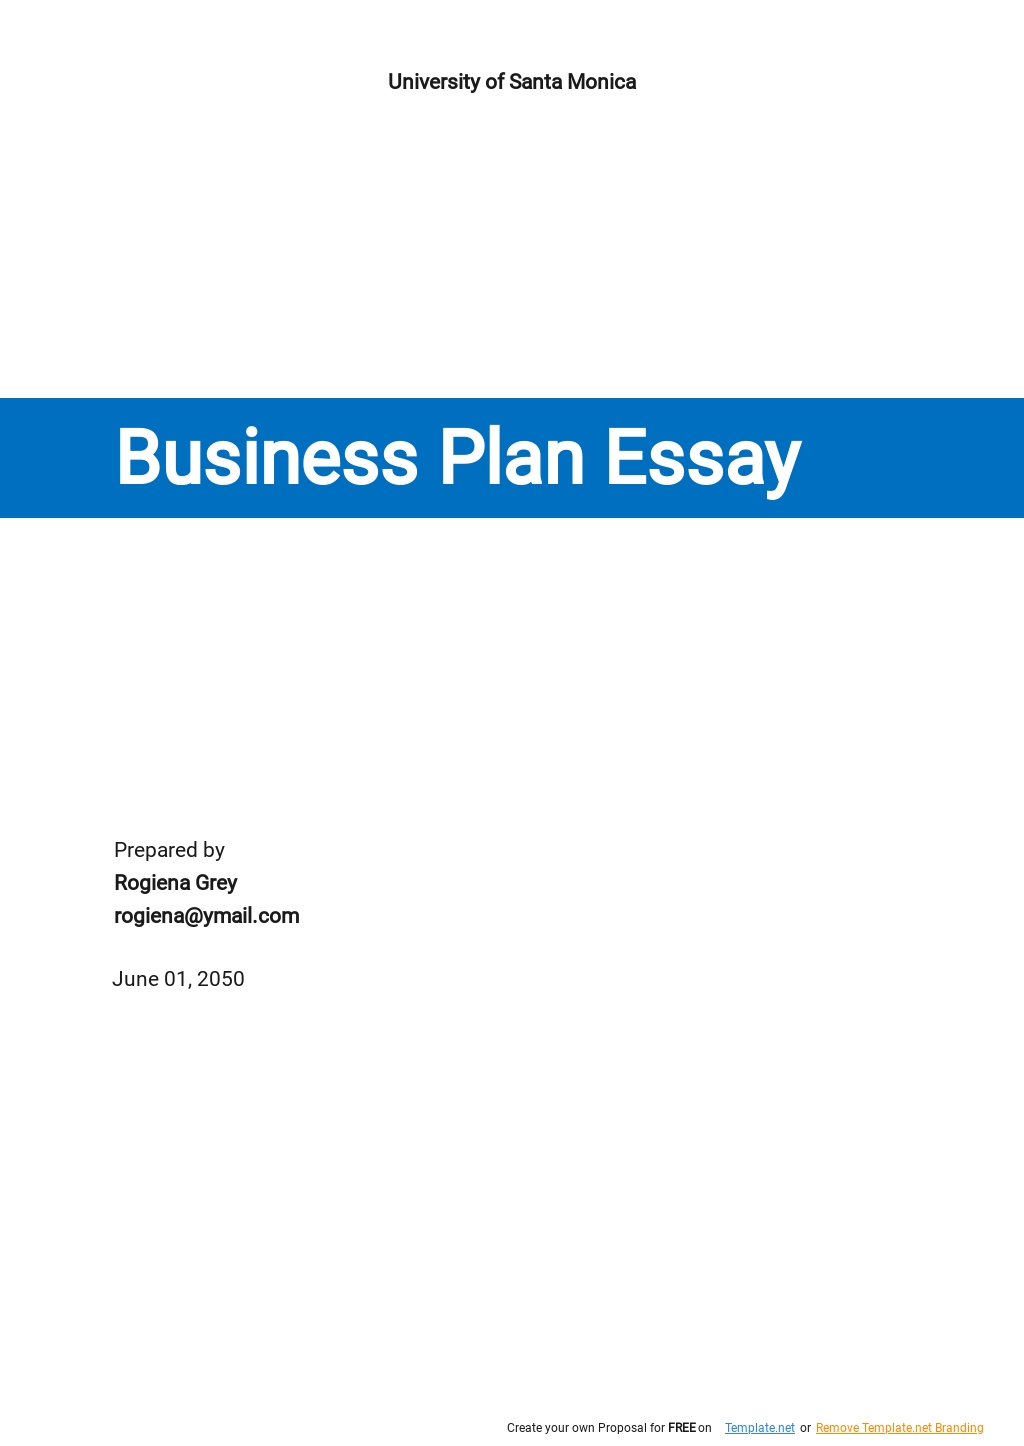 essay about a business plan